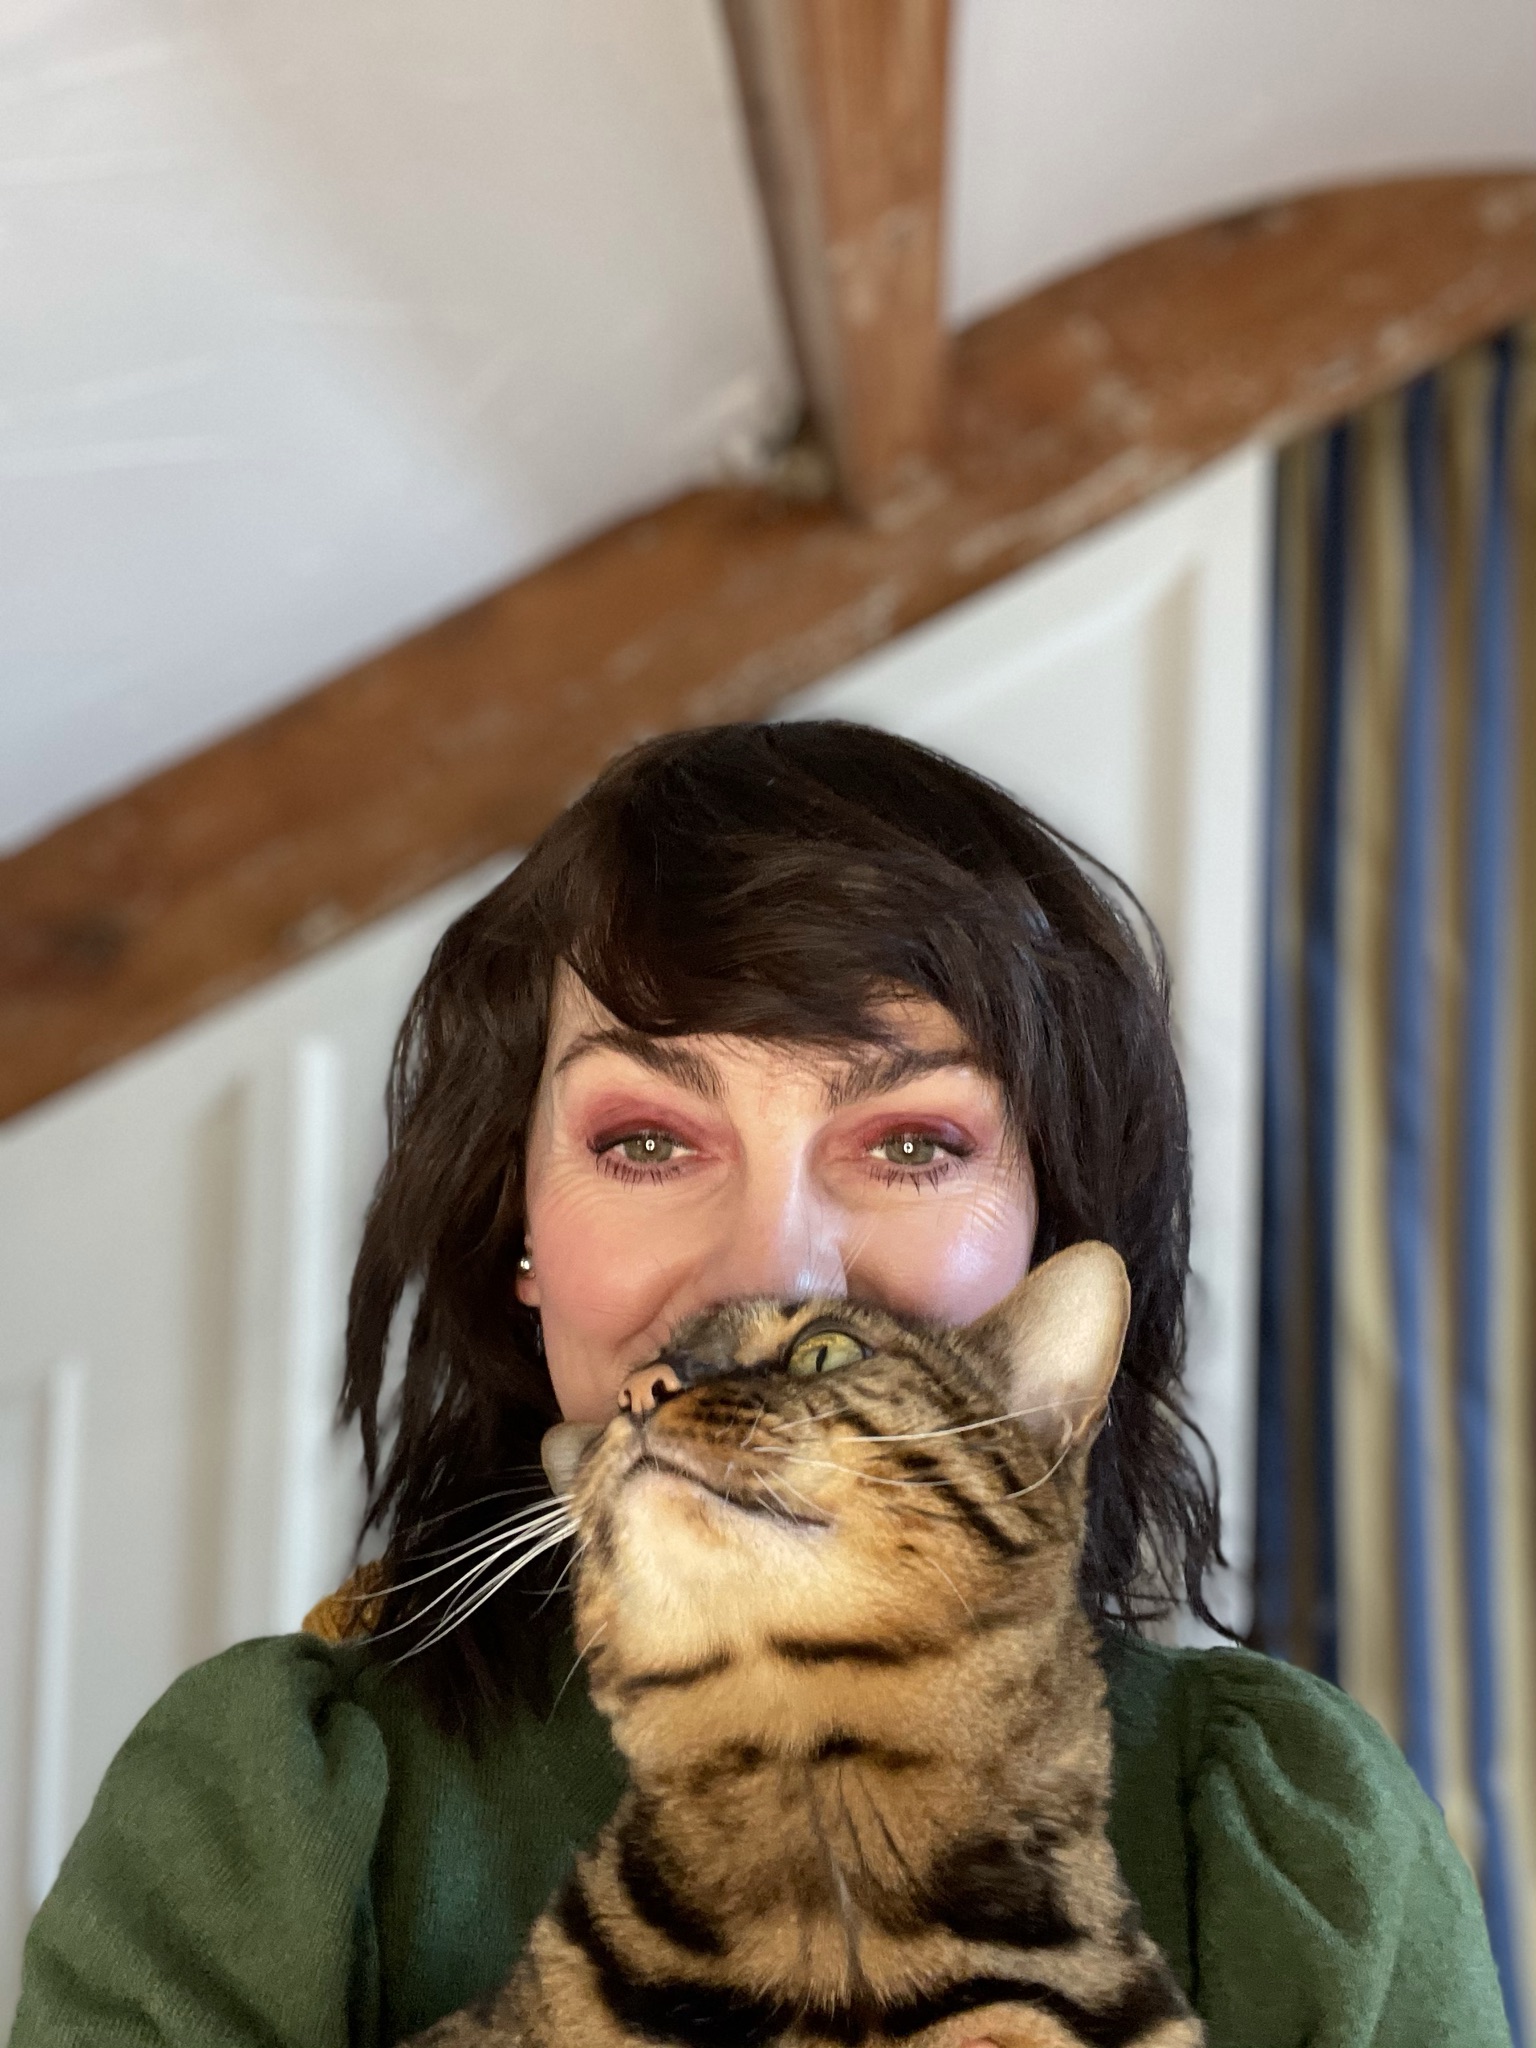 Jo Leversuch makeup artist with healthy regrown eyebrows and bengal cat